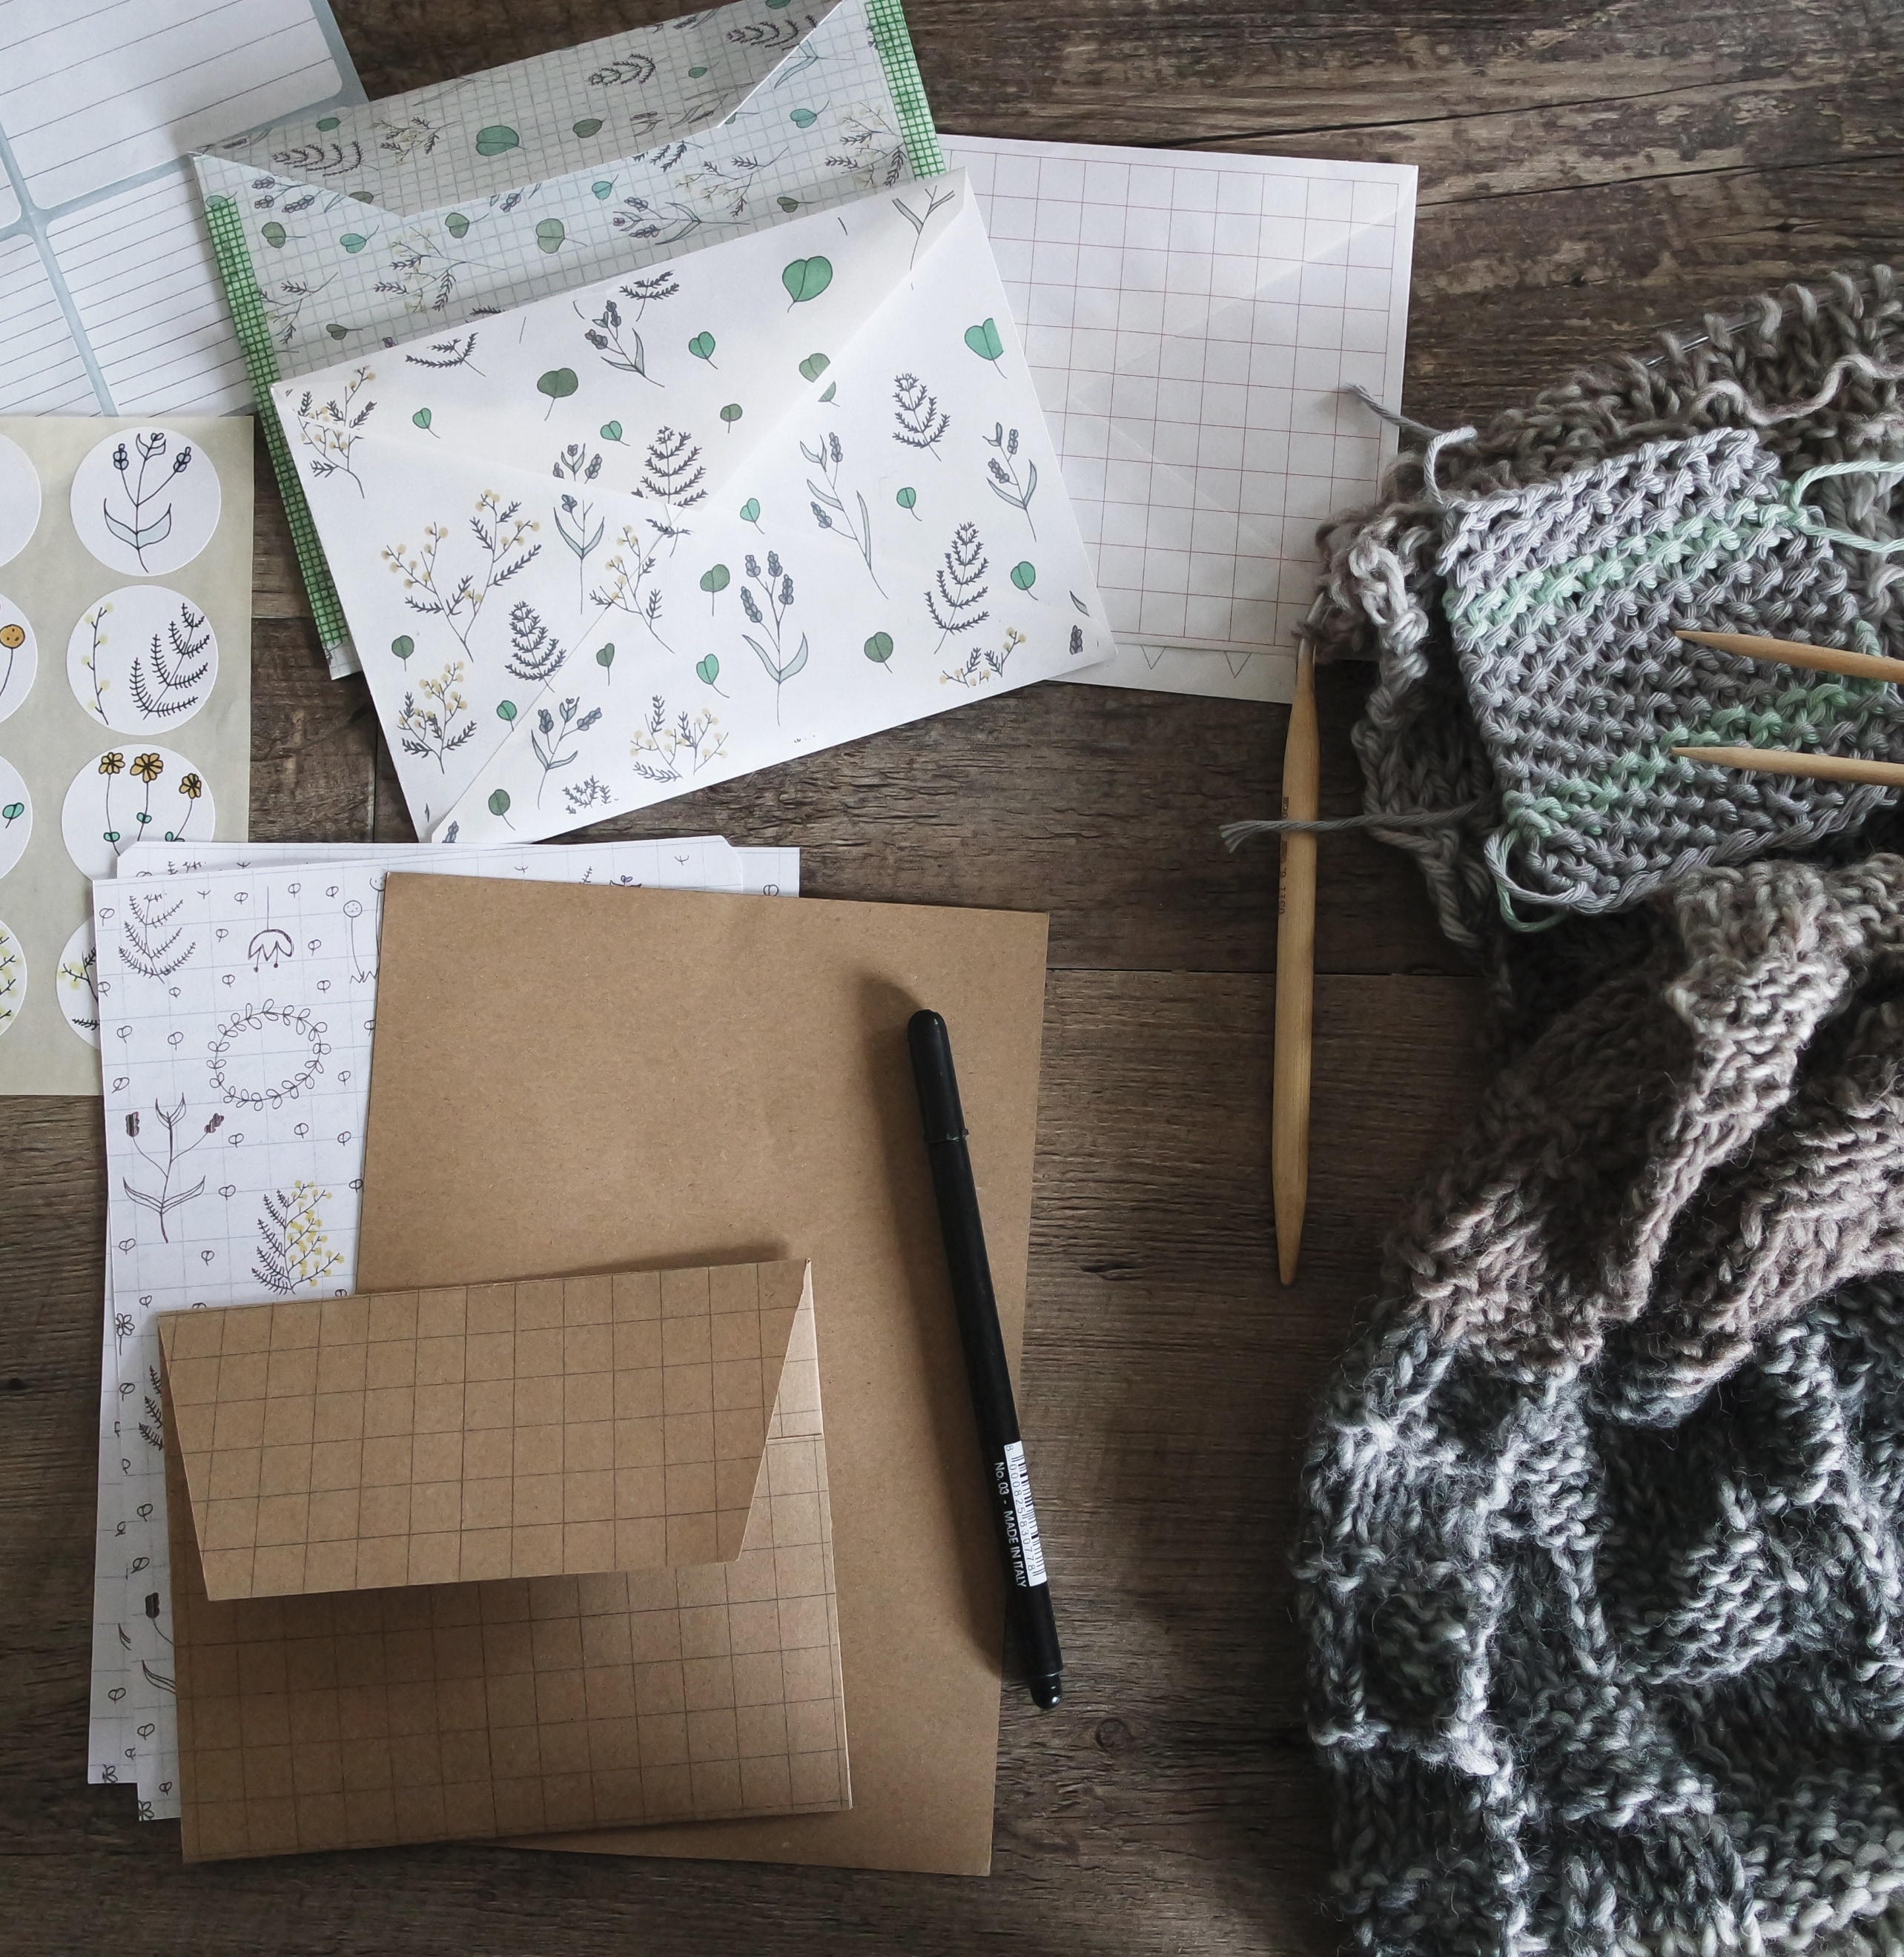 papers, pens, and crochet textile